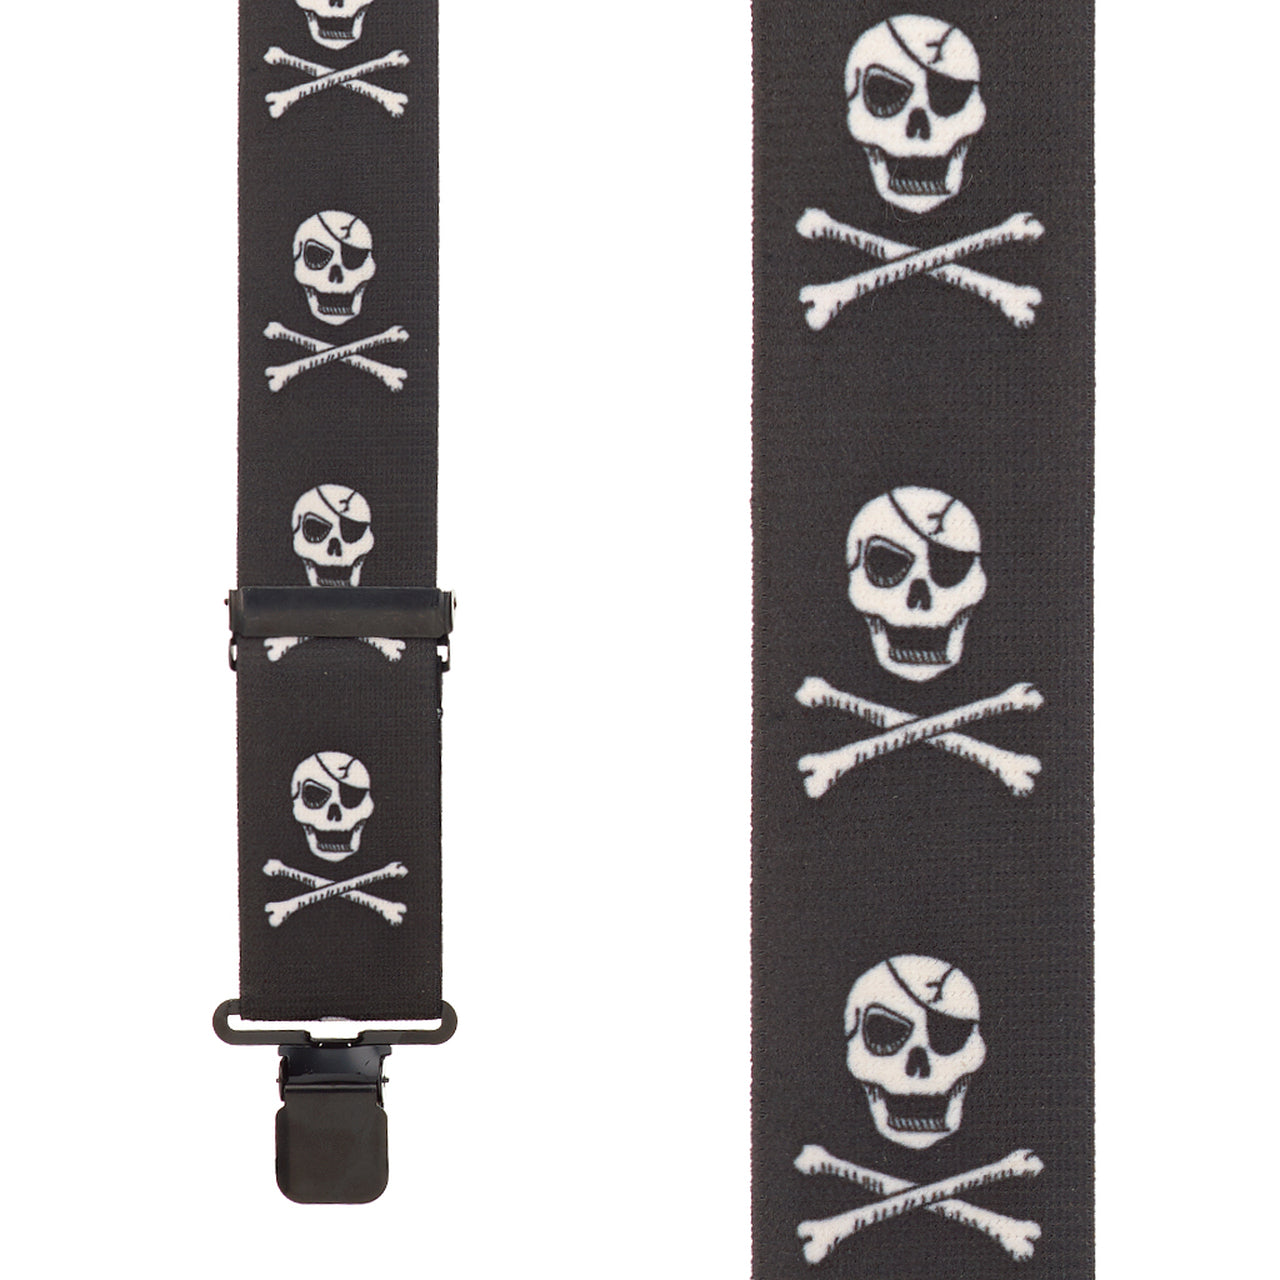 Skull and Bones Suspenders-Made in the USA